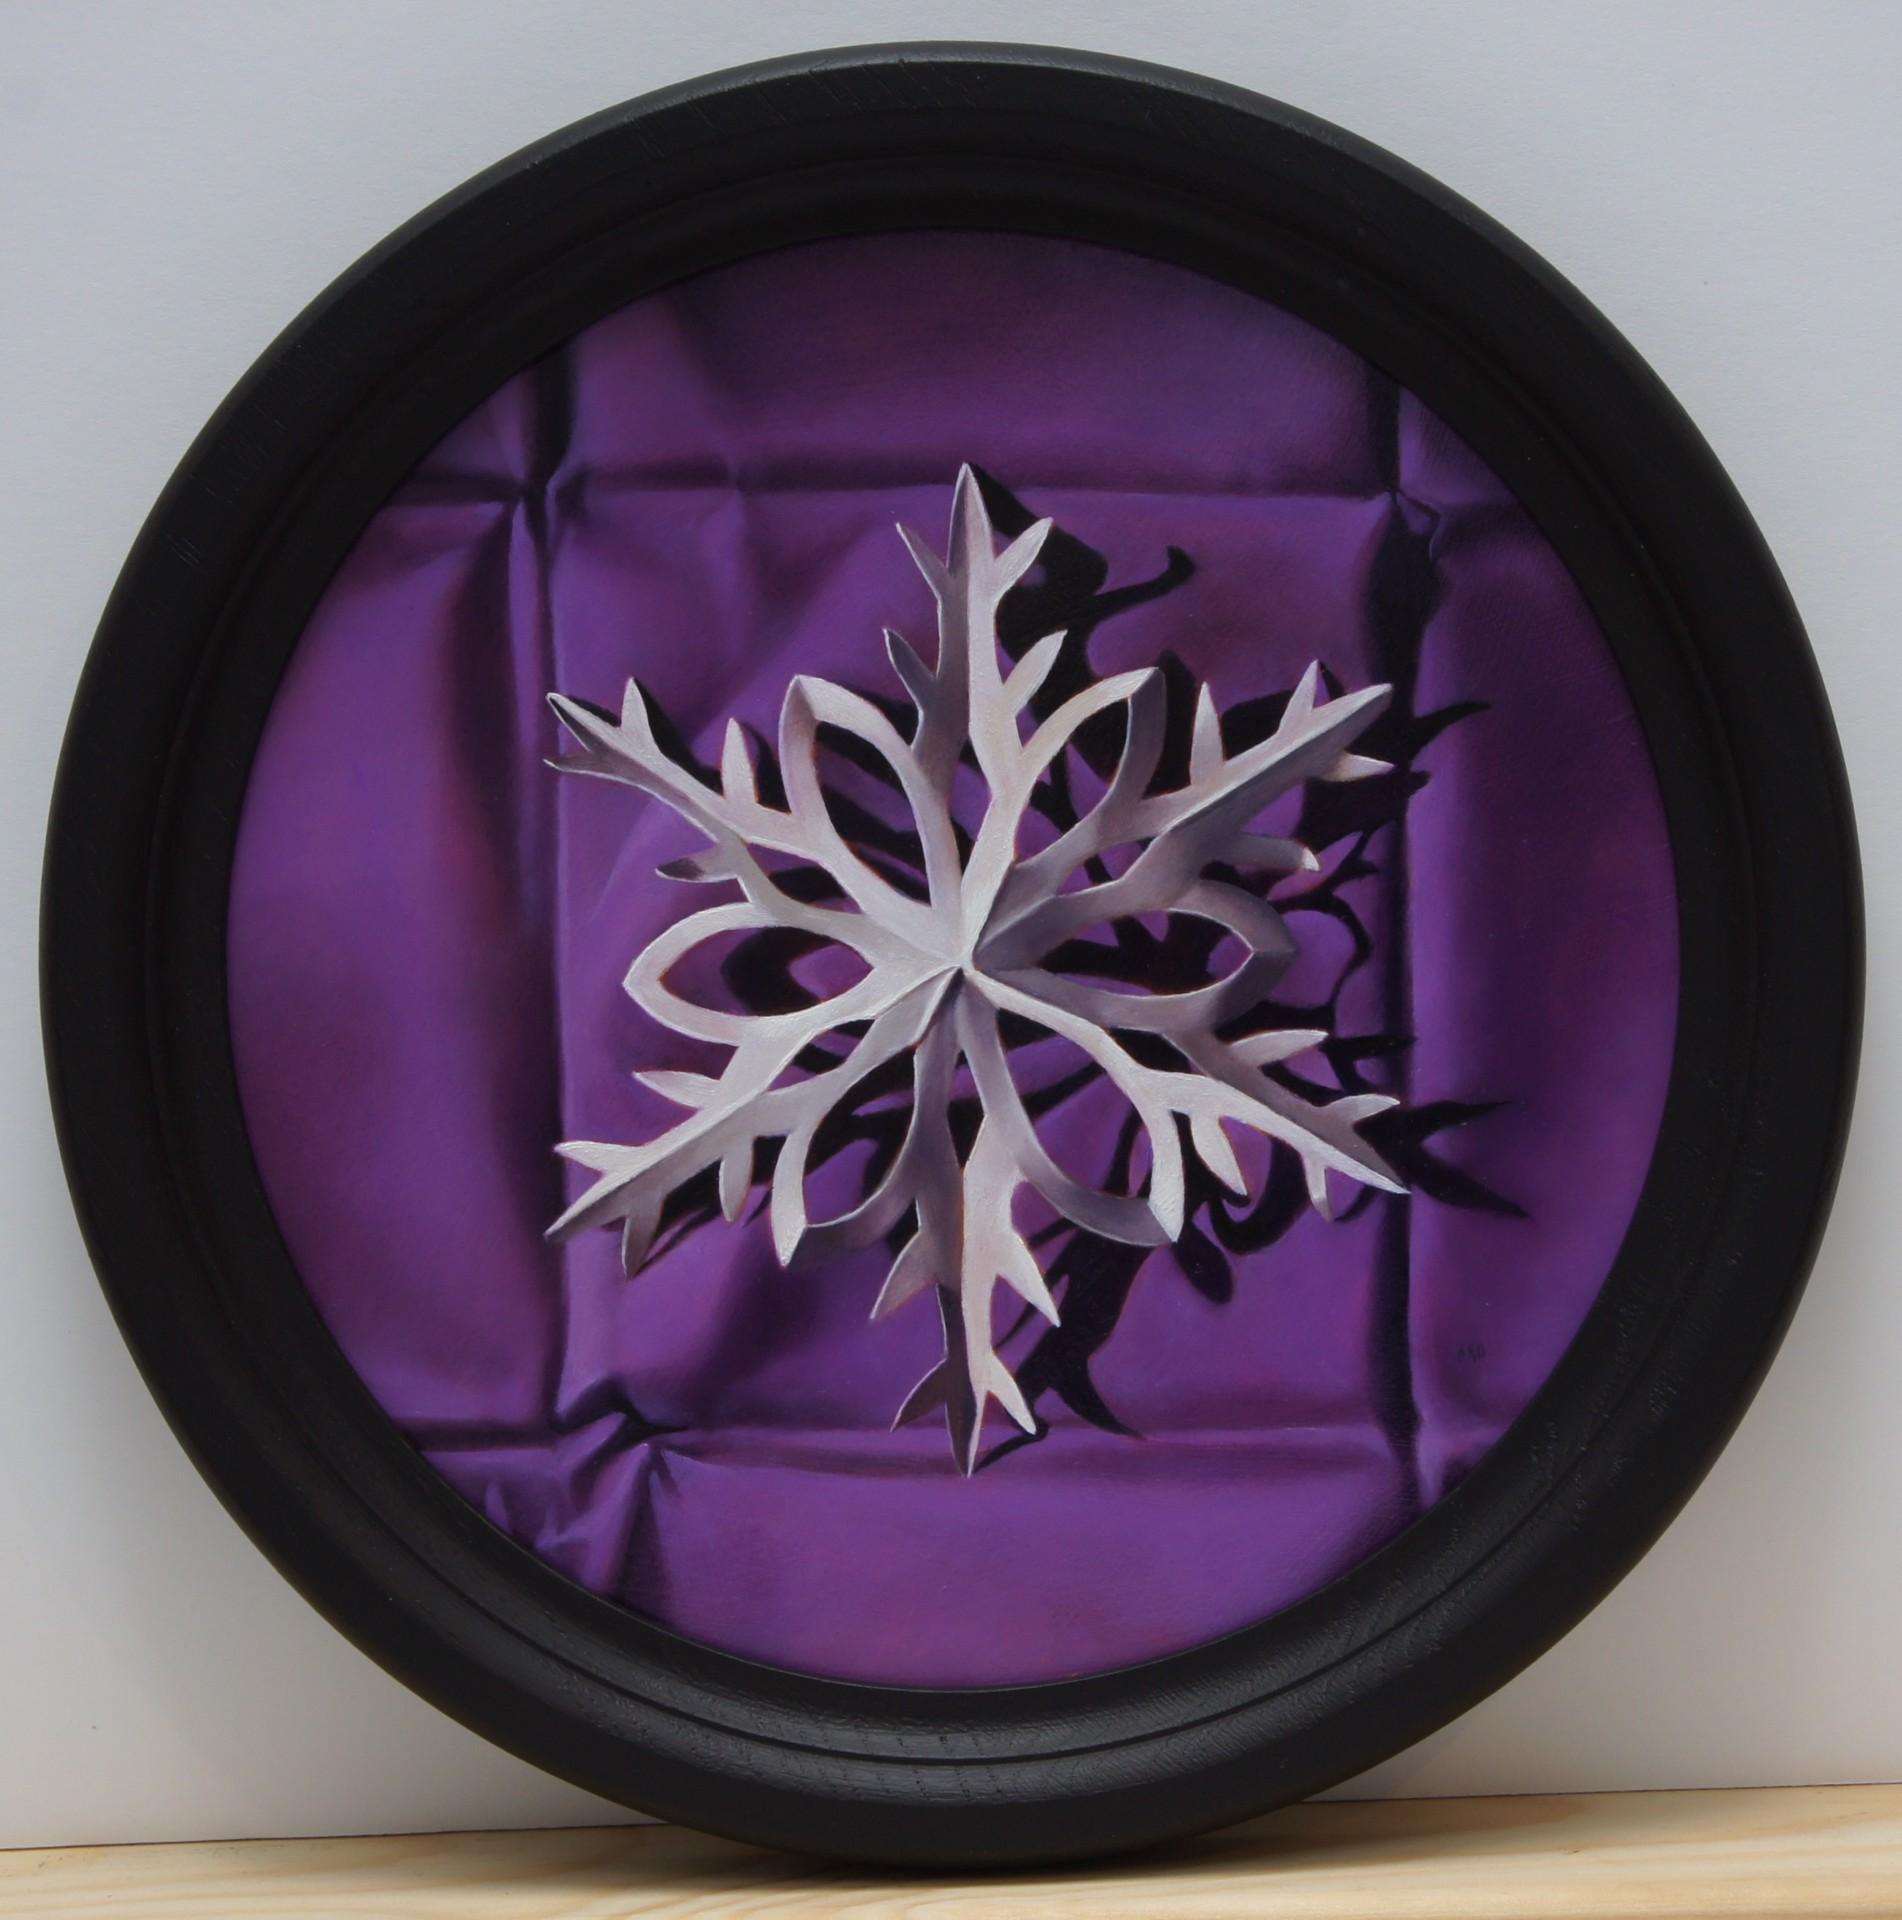 Paper Snowflake 4 - Painting by Amy Ordoveza